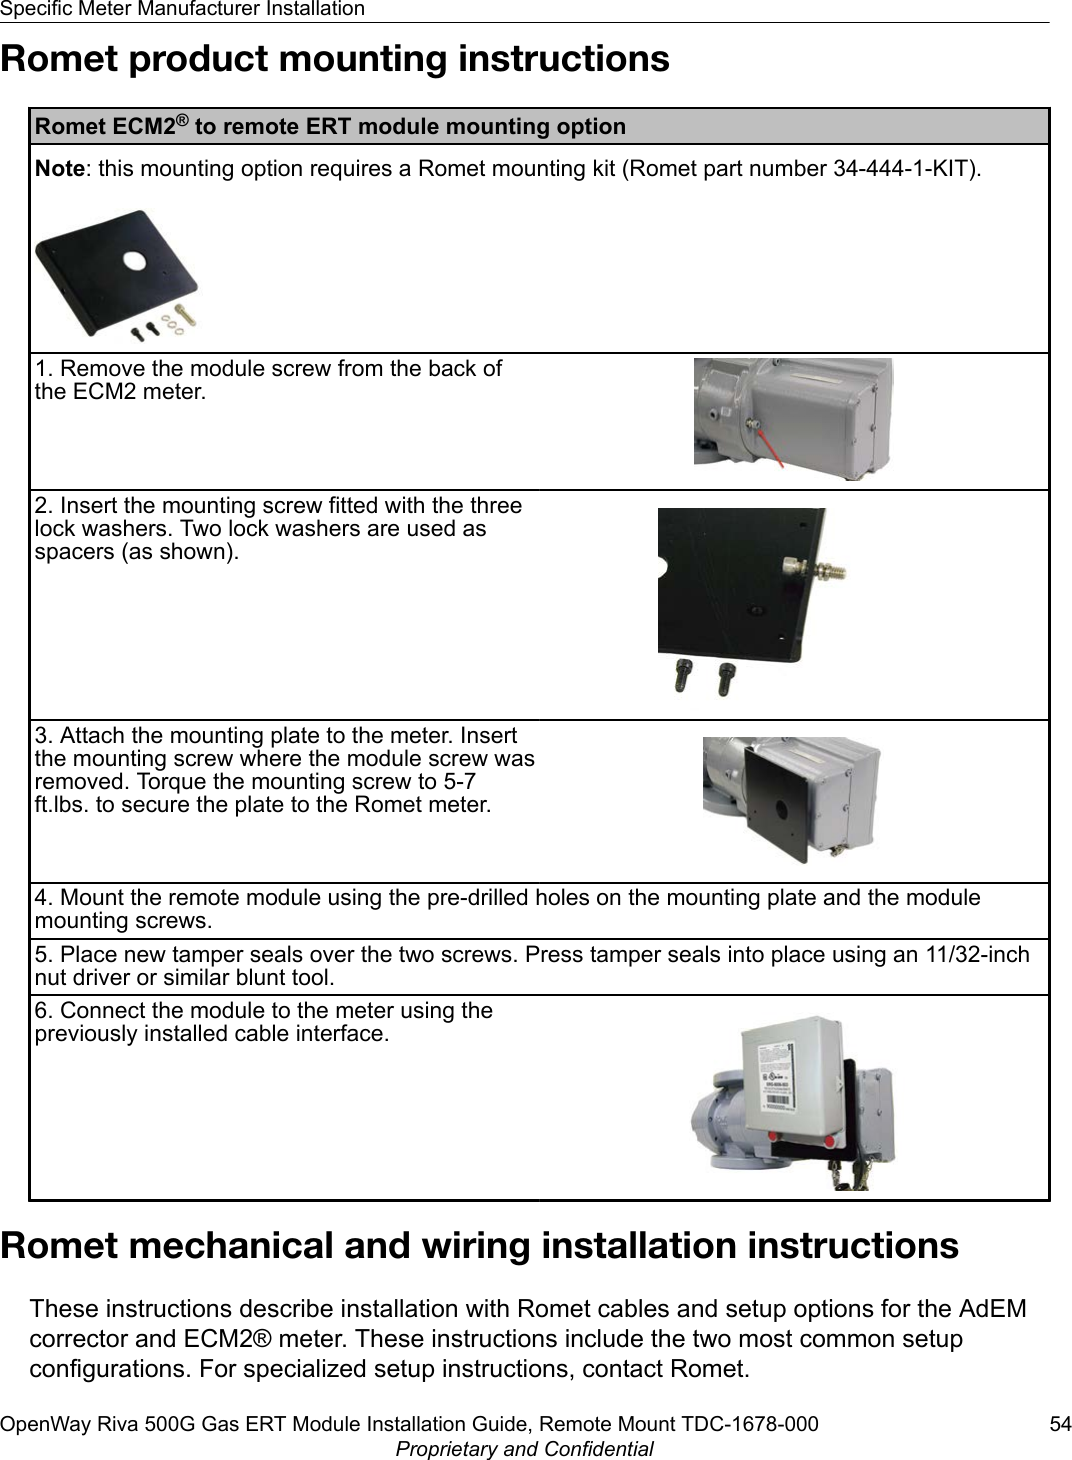 Romet product mounting instructionsRomet ECM2® to remote ERT module mounting optionNote: this mounting option requires a Romet mounting kit (Romet part number 34-444-1-KIT).1. Remove the module screw from the back ofthe ECM2 meter.2. Insert the mounting screw fitted with the threelock washers. Two lock washers are used asspacers (as shown).3. Attach the mounting plate to the meter. Insertthe mounting screw where the module screw wasremoved. Torque the mounting screw to 5-7ft.lbs. to secure the plate to the Romet meter.4. Mount the remote module using the pre-drilled holes on the mounting plate and the modulemounting screws.5. Place new tamper seals over the two screws. Press tamper seals into place using an 11/32-inchnut driver or similar blunt tool.6. Connect the module to the meter using thepreviously installed cable interface.Romet mechanical and wiring installation instructionsThese instructions describe installation with Romet cables and setup options for the AdEMcorrector and ECM2® meter. These instructions include the two most common setupconfigurations. For specialized setup instructions, contact Romet.Specific Meter Manufacturer InstallationOpenWay Riva 500G Gas ERT Module Installation Guide, Remote Mount TDC-1678-000 54Proprietary and Confidential